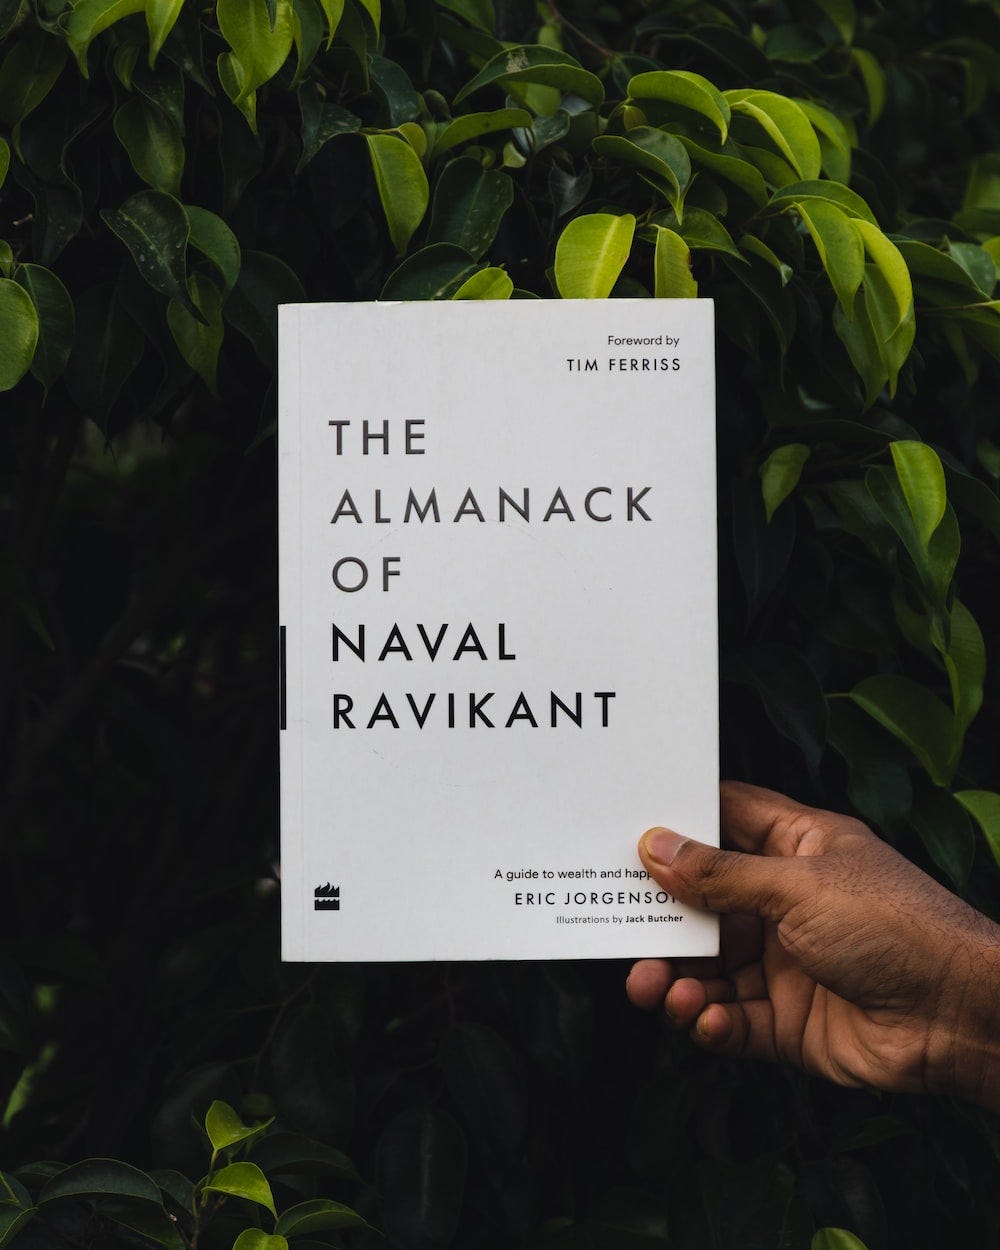 Naval Ravikant hints at future plans for Product Hunt and adding